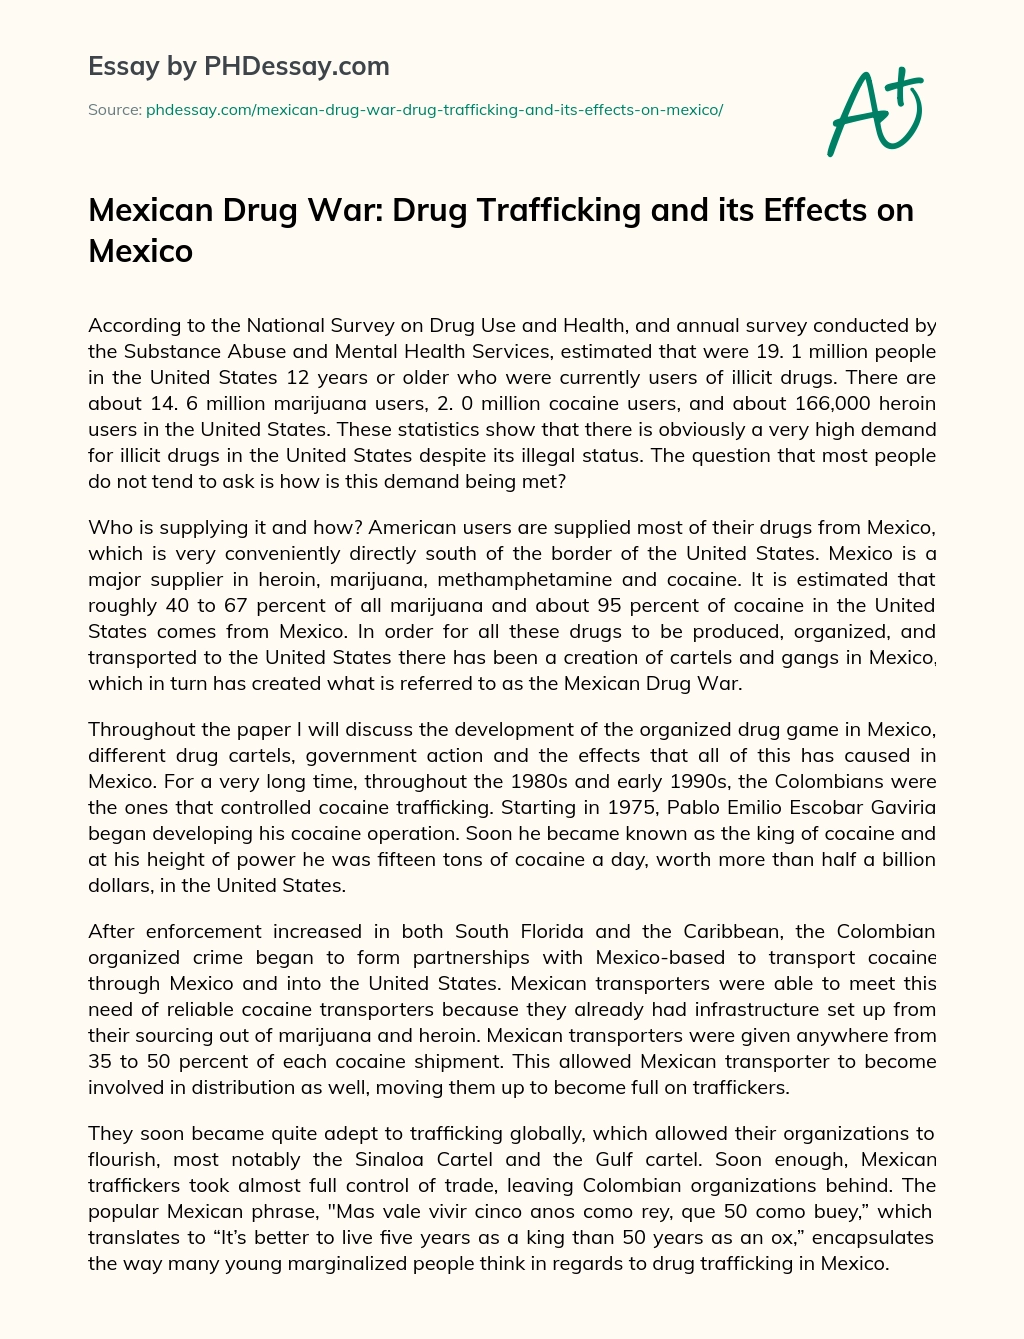 Mexican Drug War: Drug Trafficking and its Effects on Mexico essay